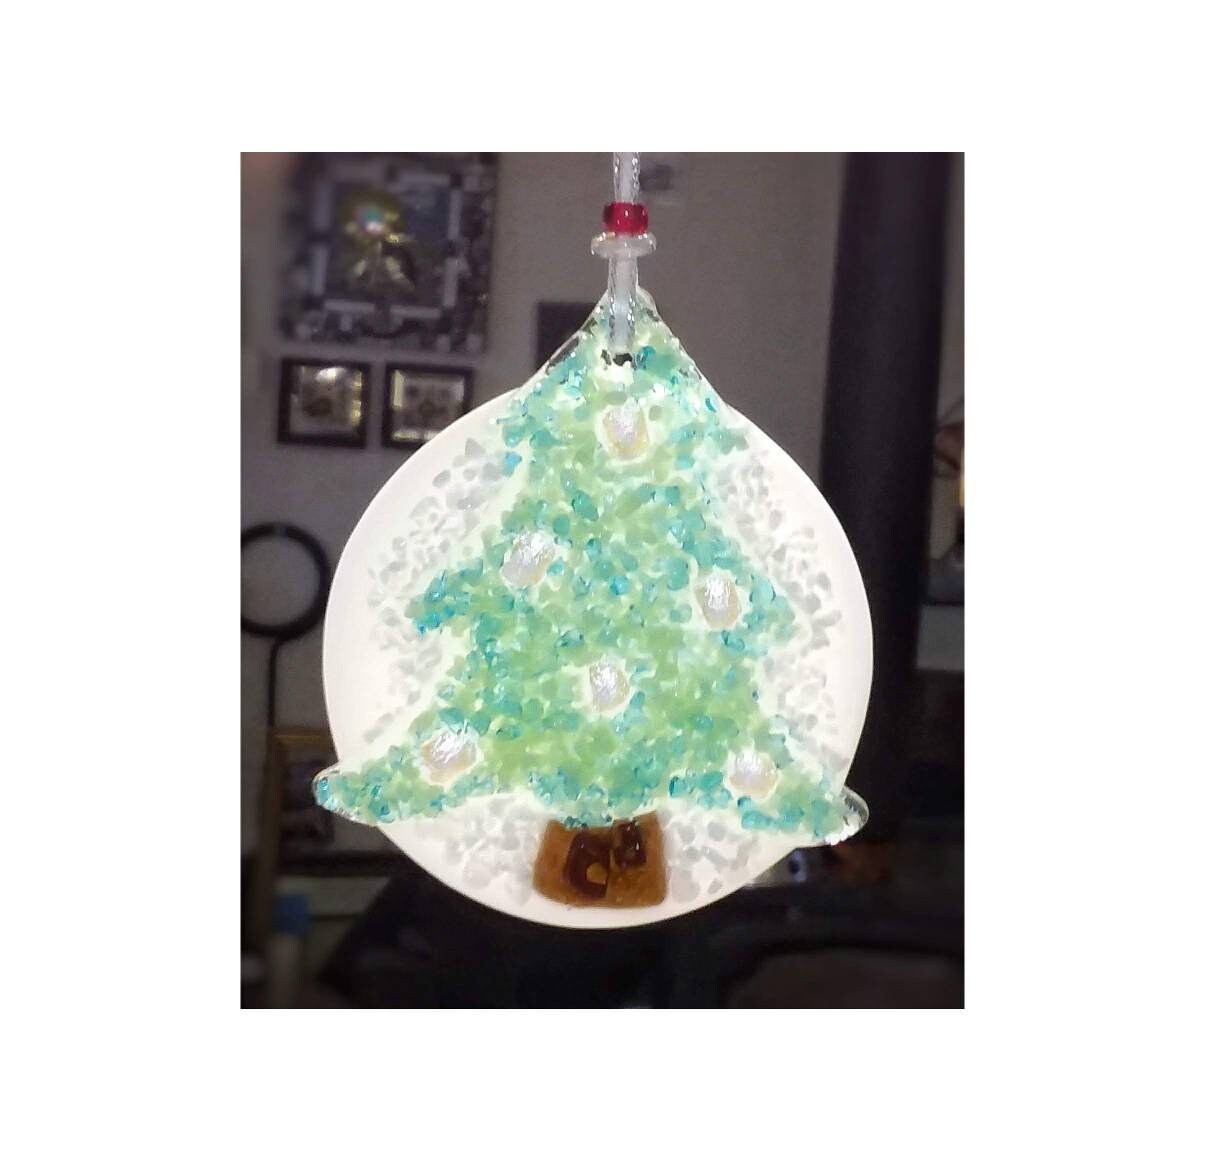 Christmas Tree Ornament. Fused Glass Art with green & white Embellished with Iridescent Dichroic glass. Includes beaded loop with gift box.